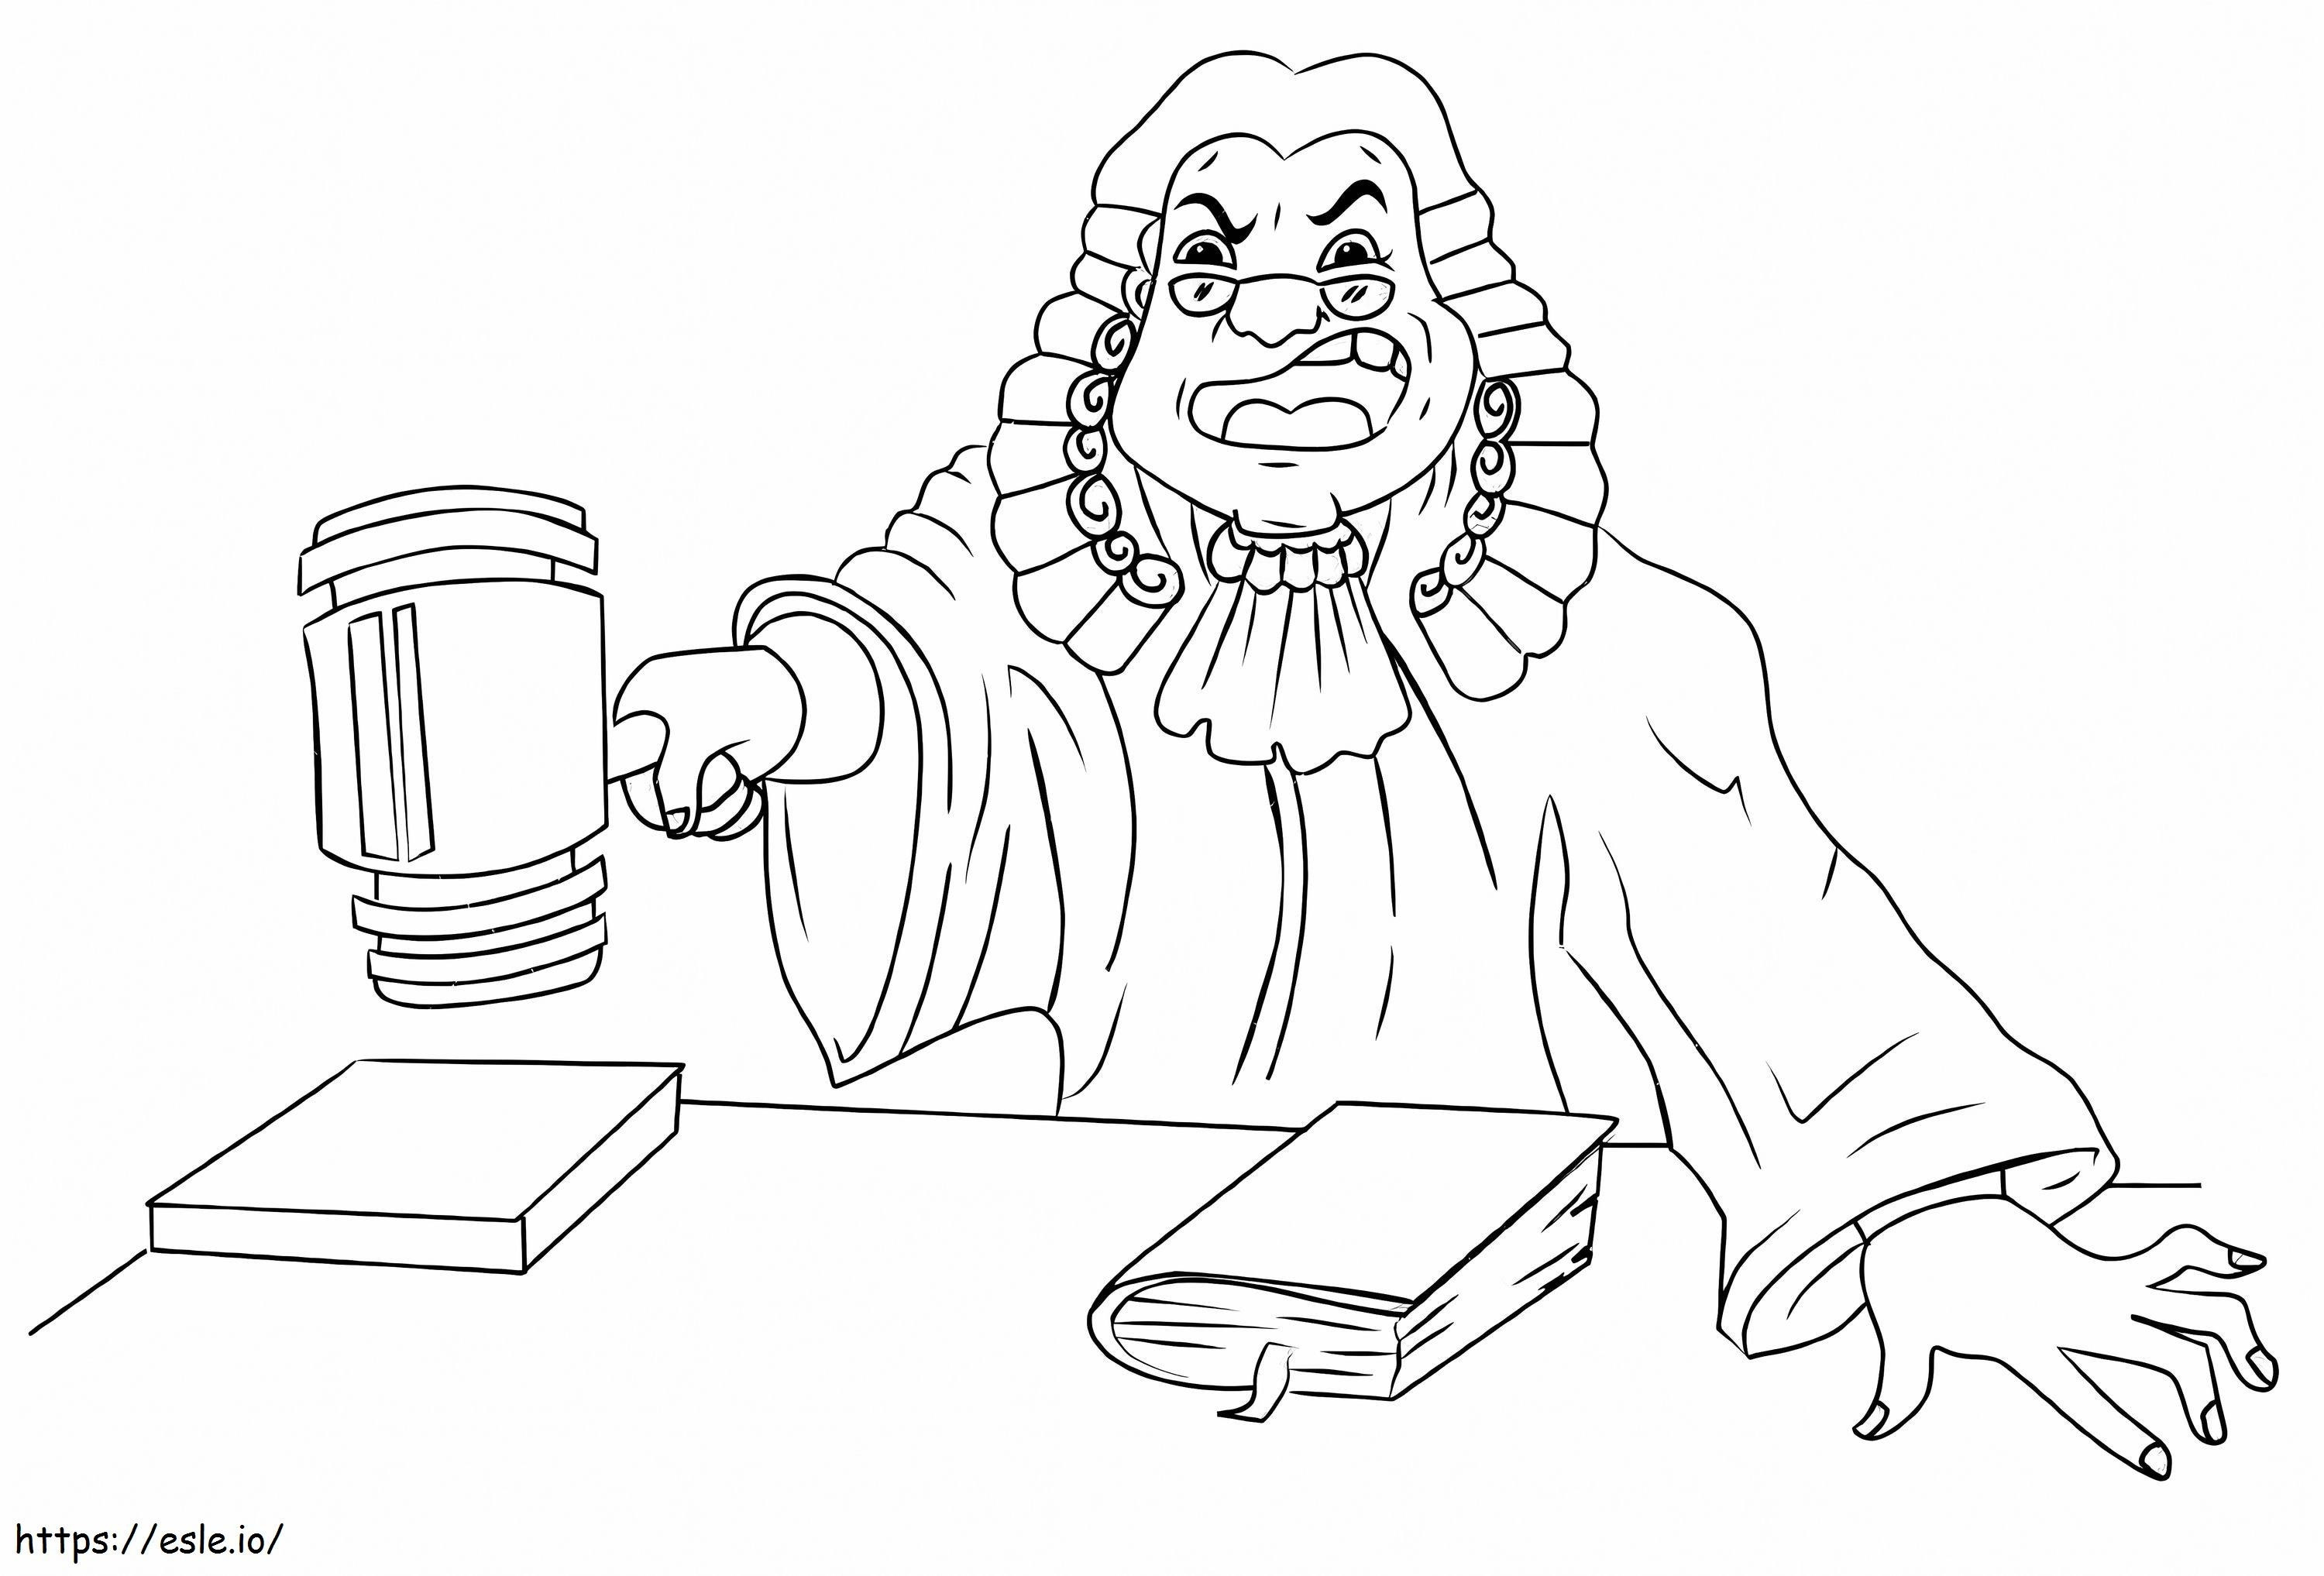 Judge Is Angry coloring page